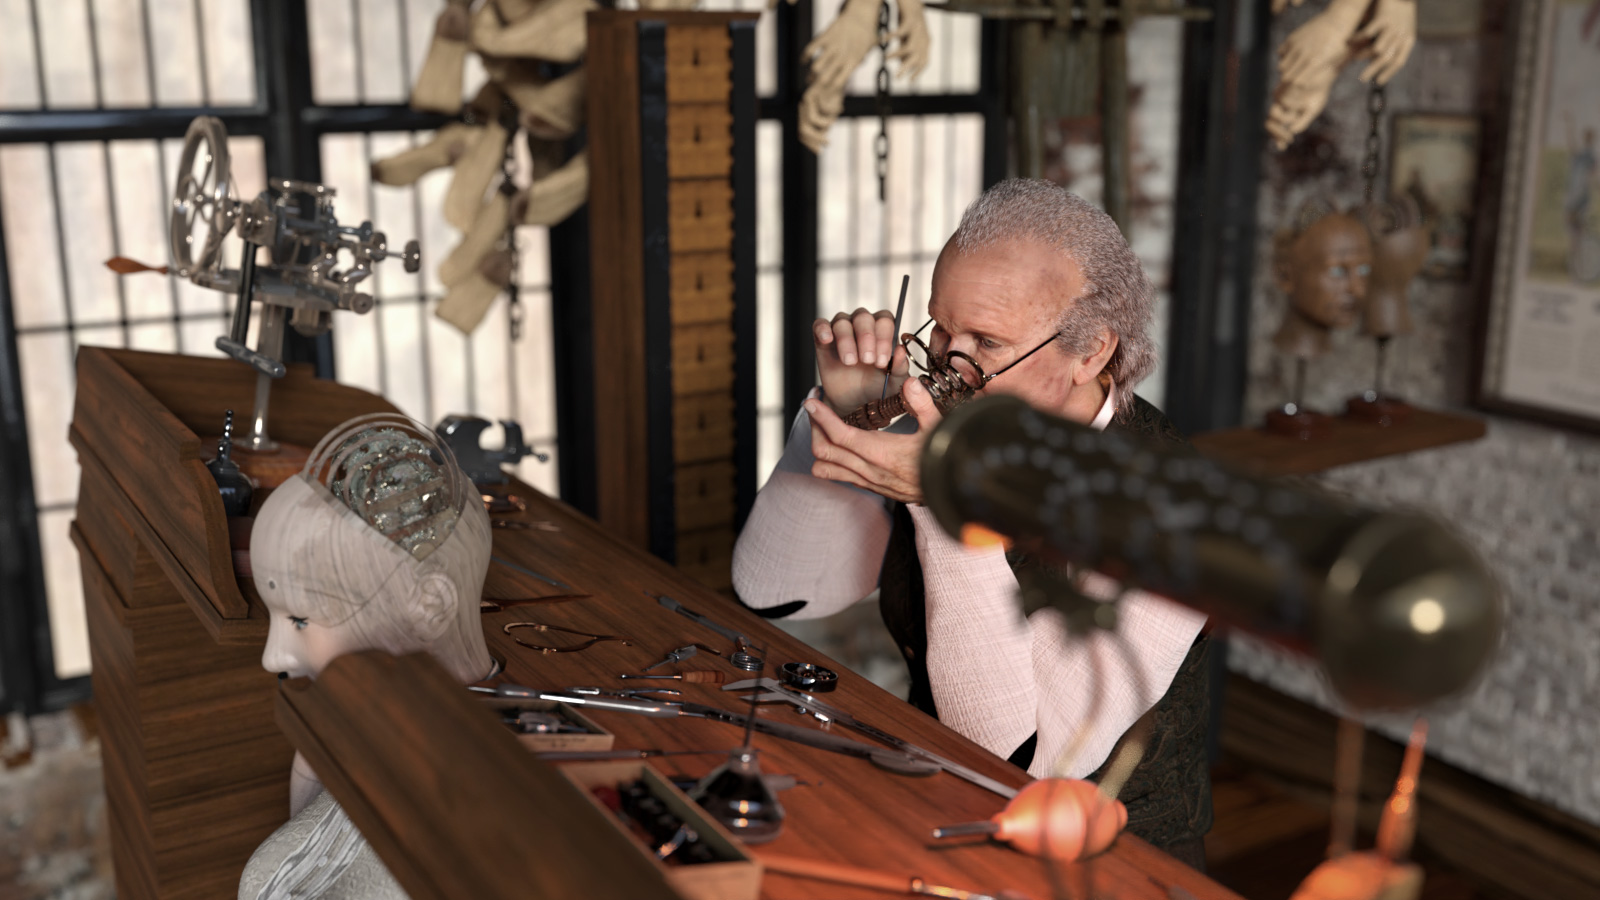 The Watchmaker and the Automaton by: Ansiko, 3D Models by Daz 3D